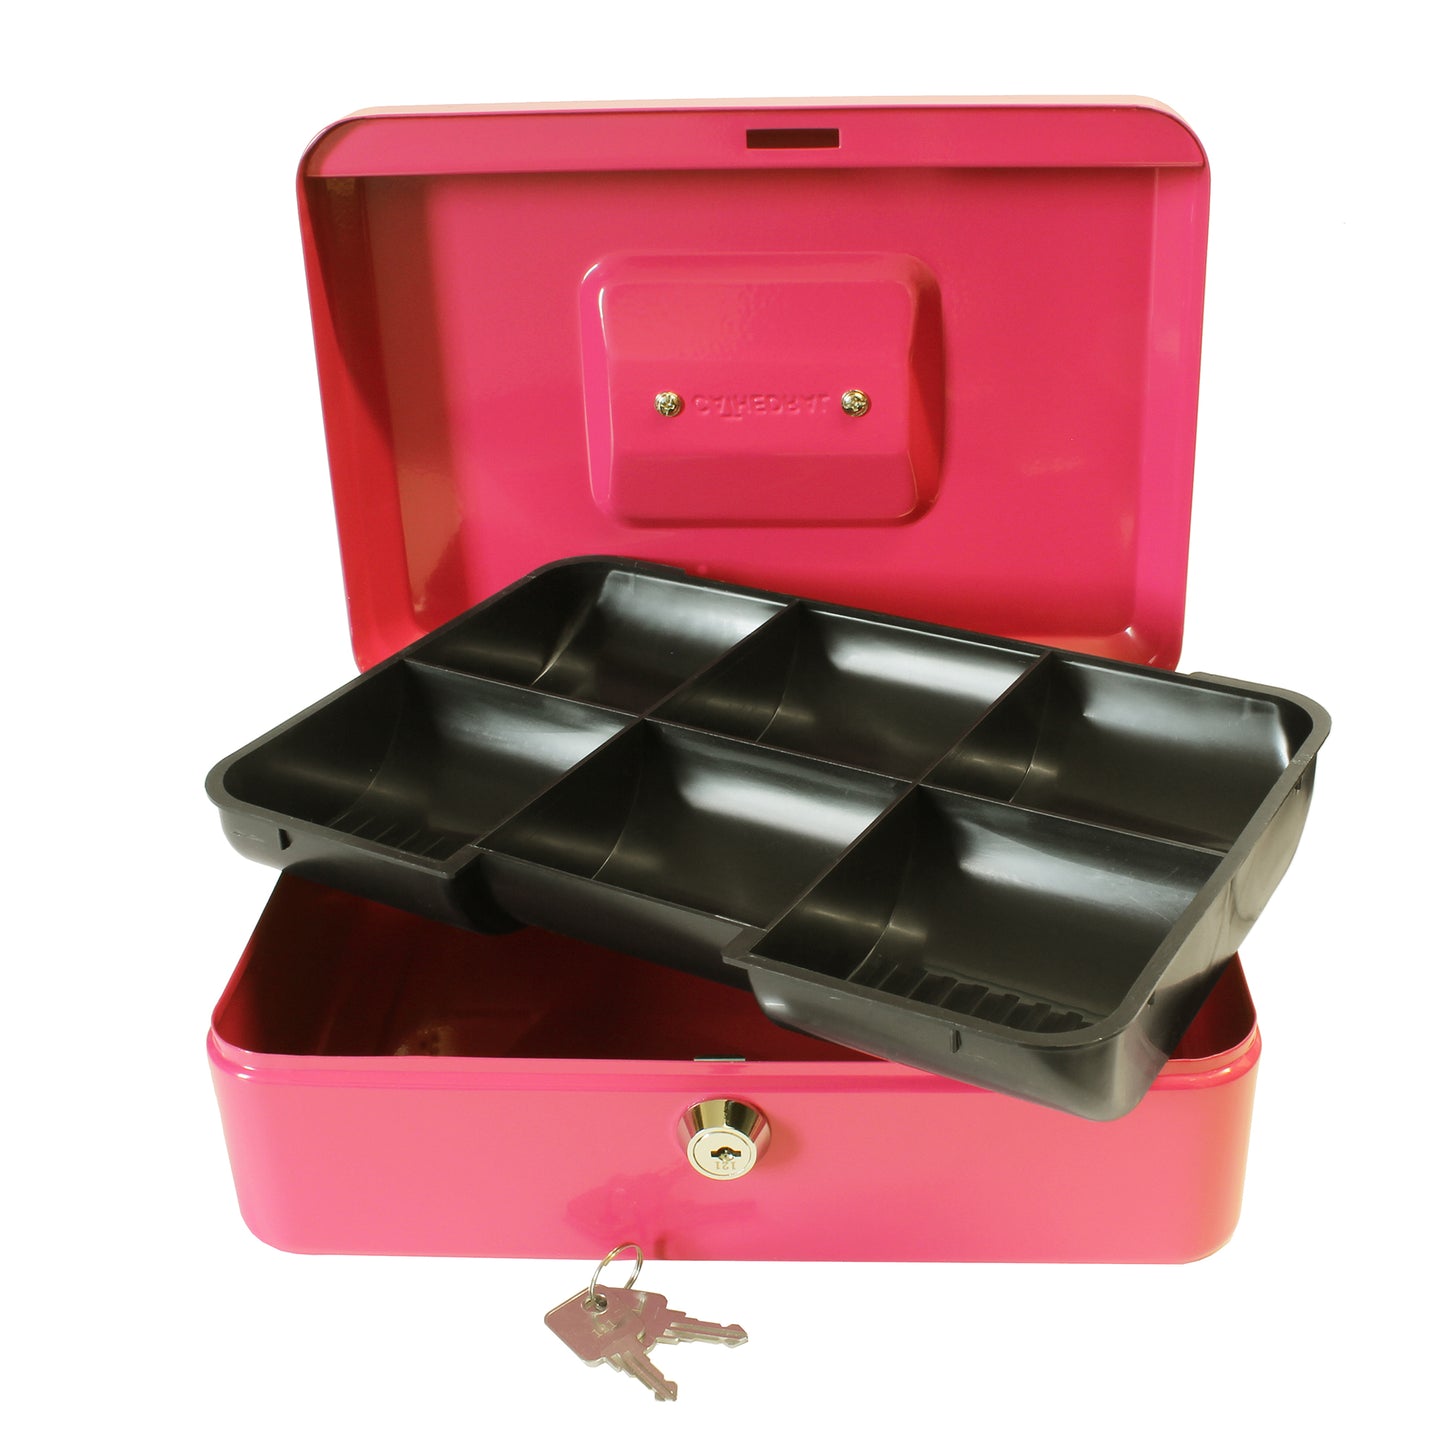 An open 10-inch key lockable bright pink cash box with a lift-out black 6-compartment tray, designed for organizing and securing coins and cash. A set of 2 keys on a ring is shown in front of the cash box.